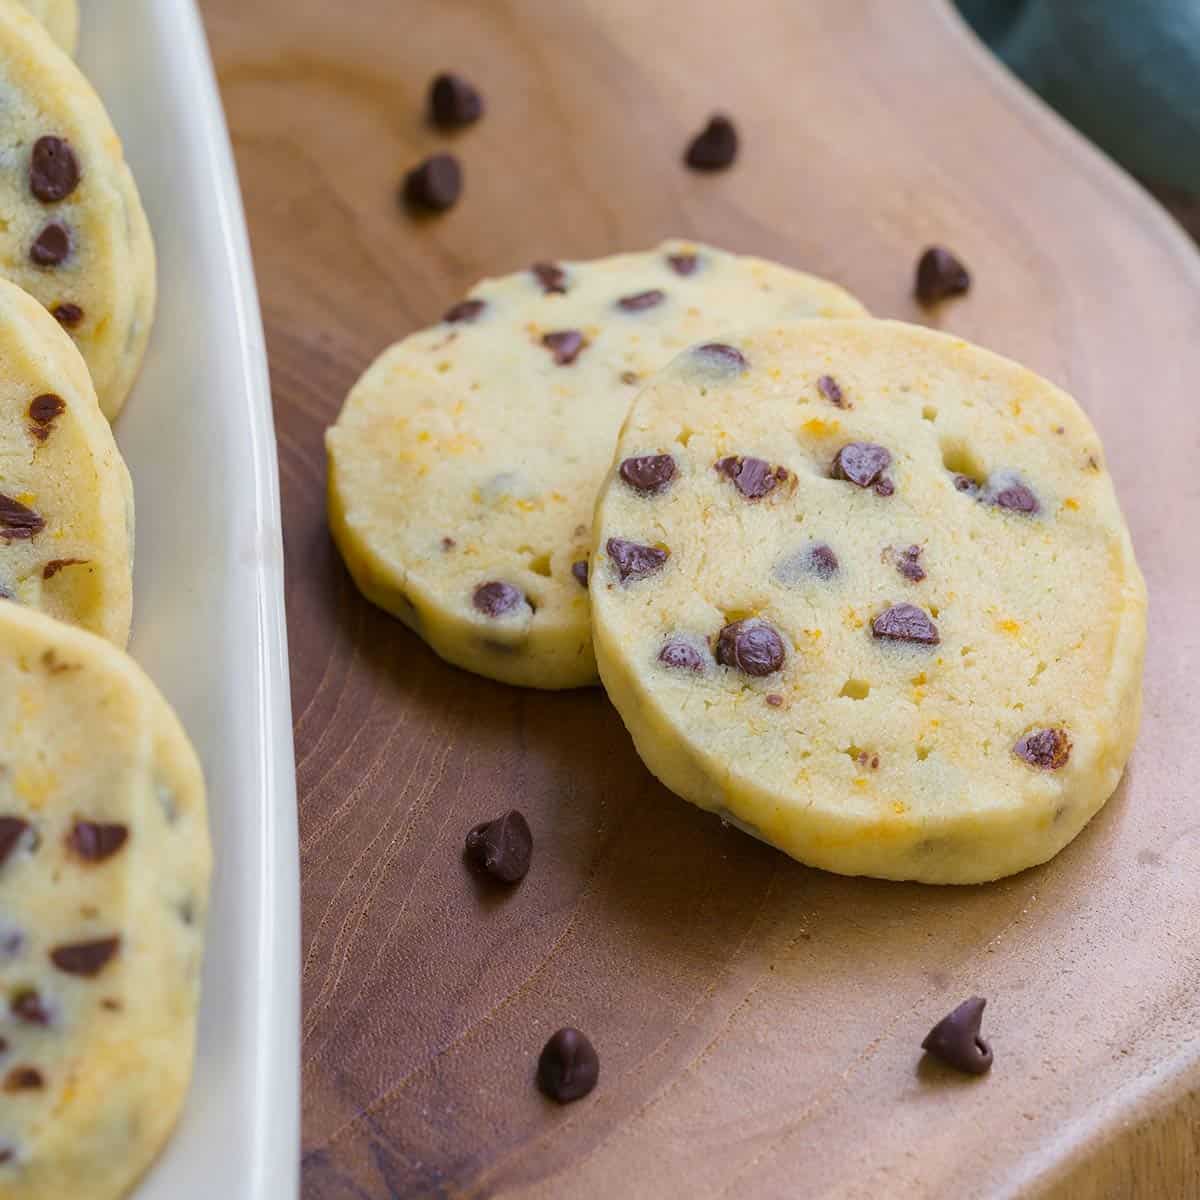 Shortbread cookies with orange anise and chocolate chips on a wooden board.